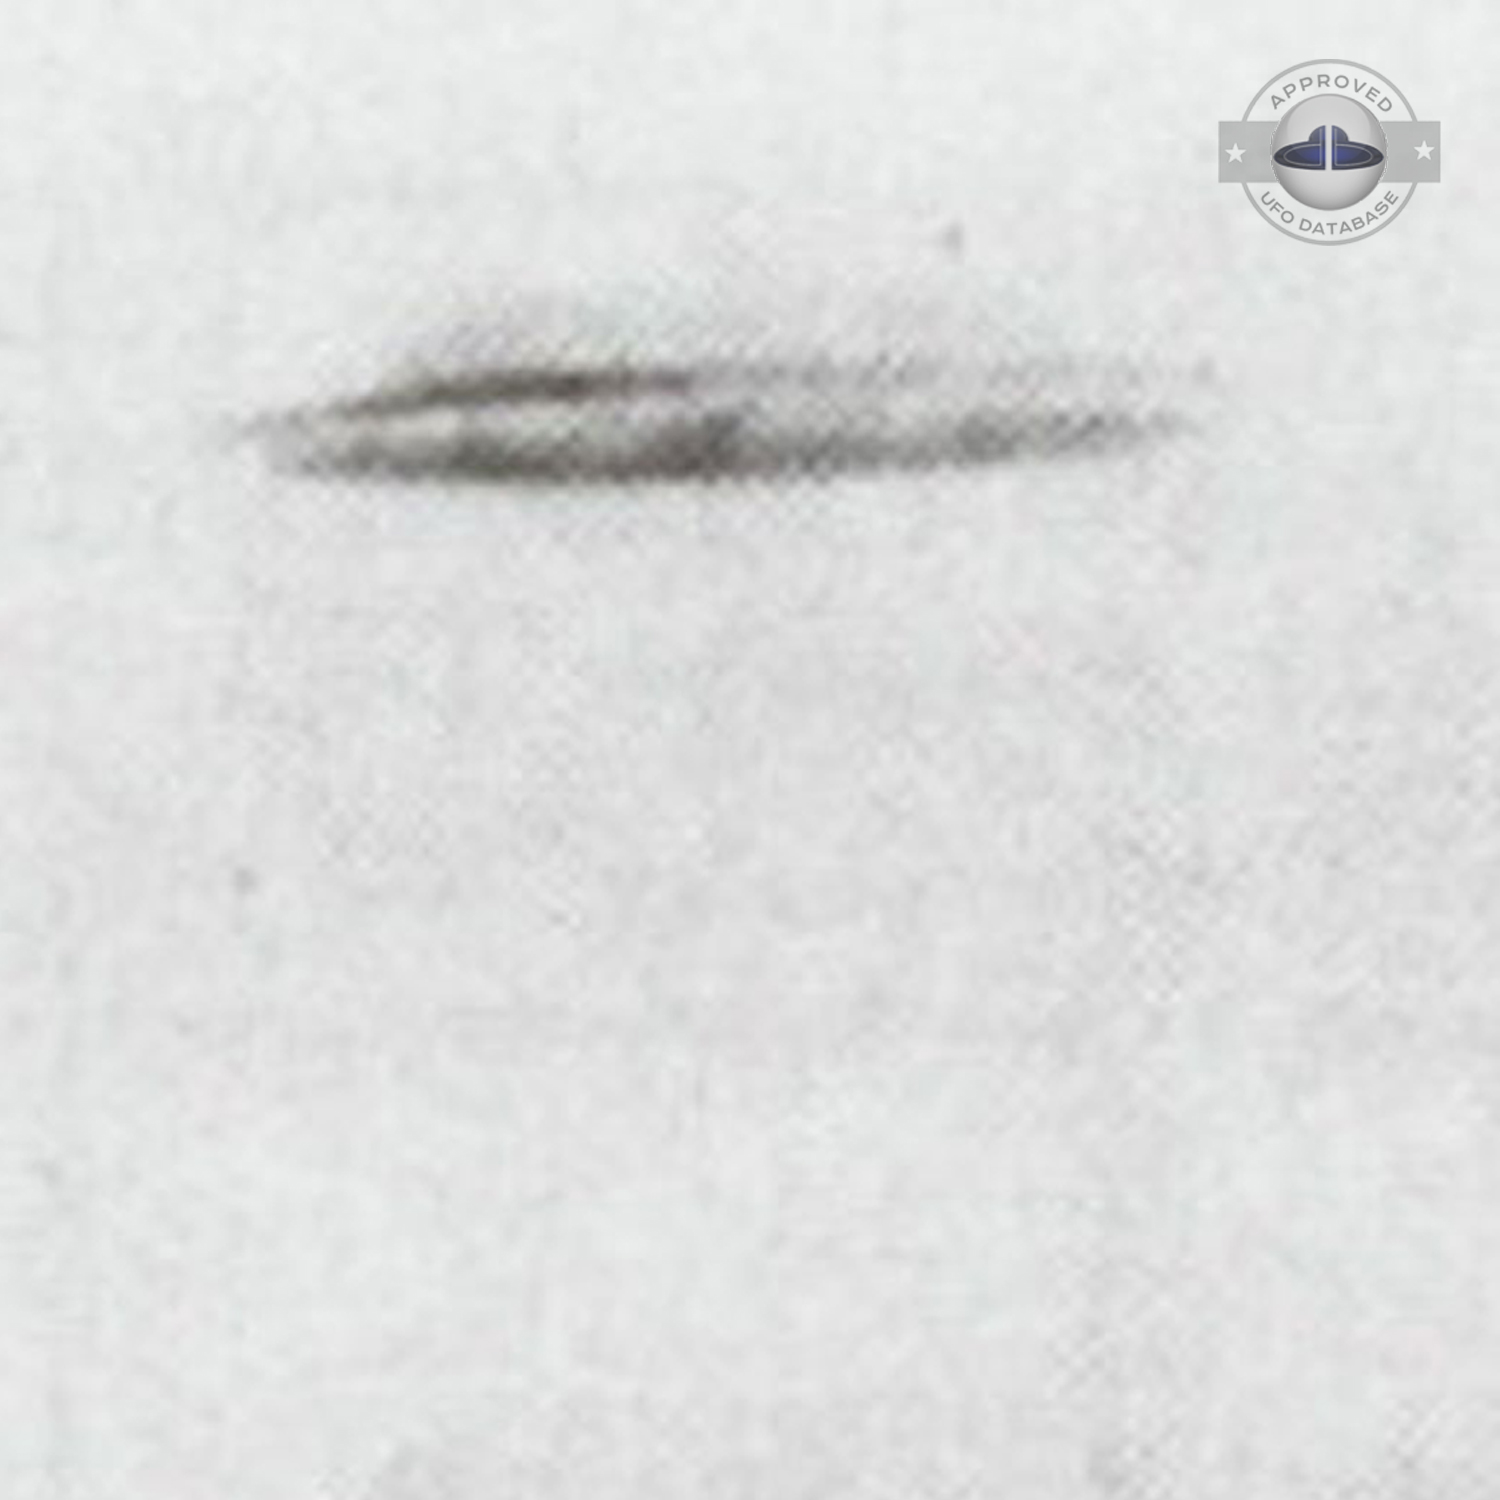 UFO over a fisherman and people in a canoe on a lake UFO Picture #45-4